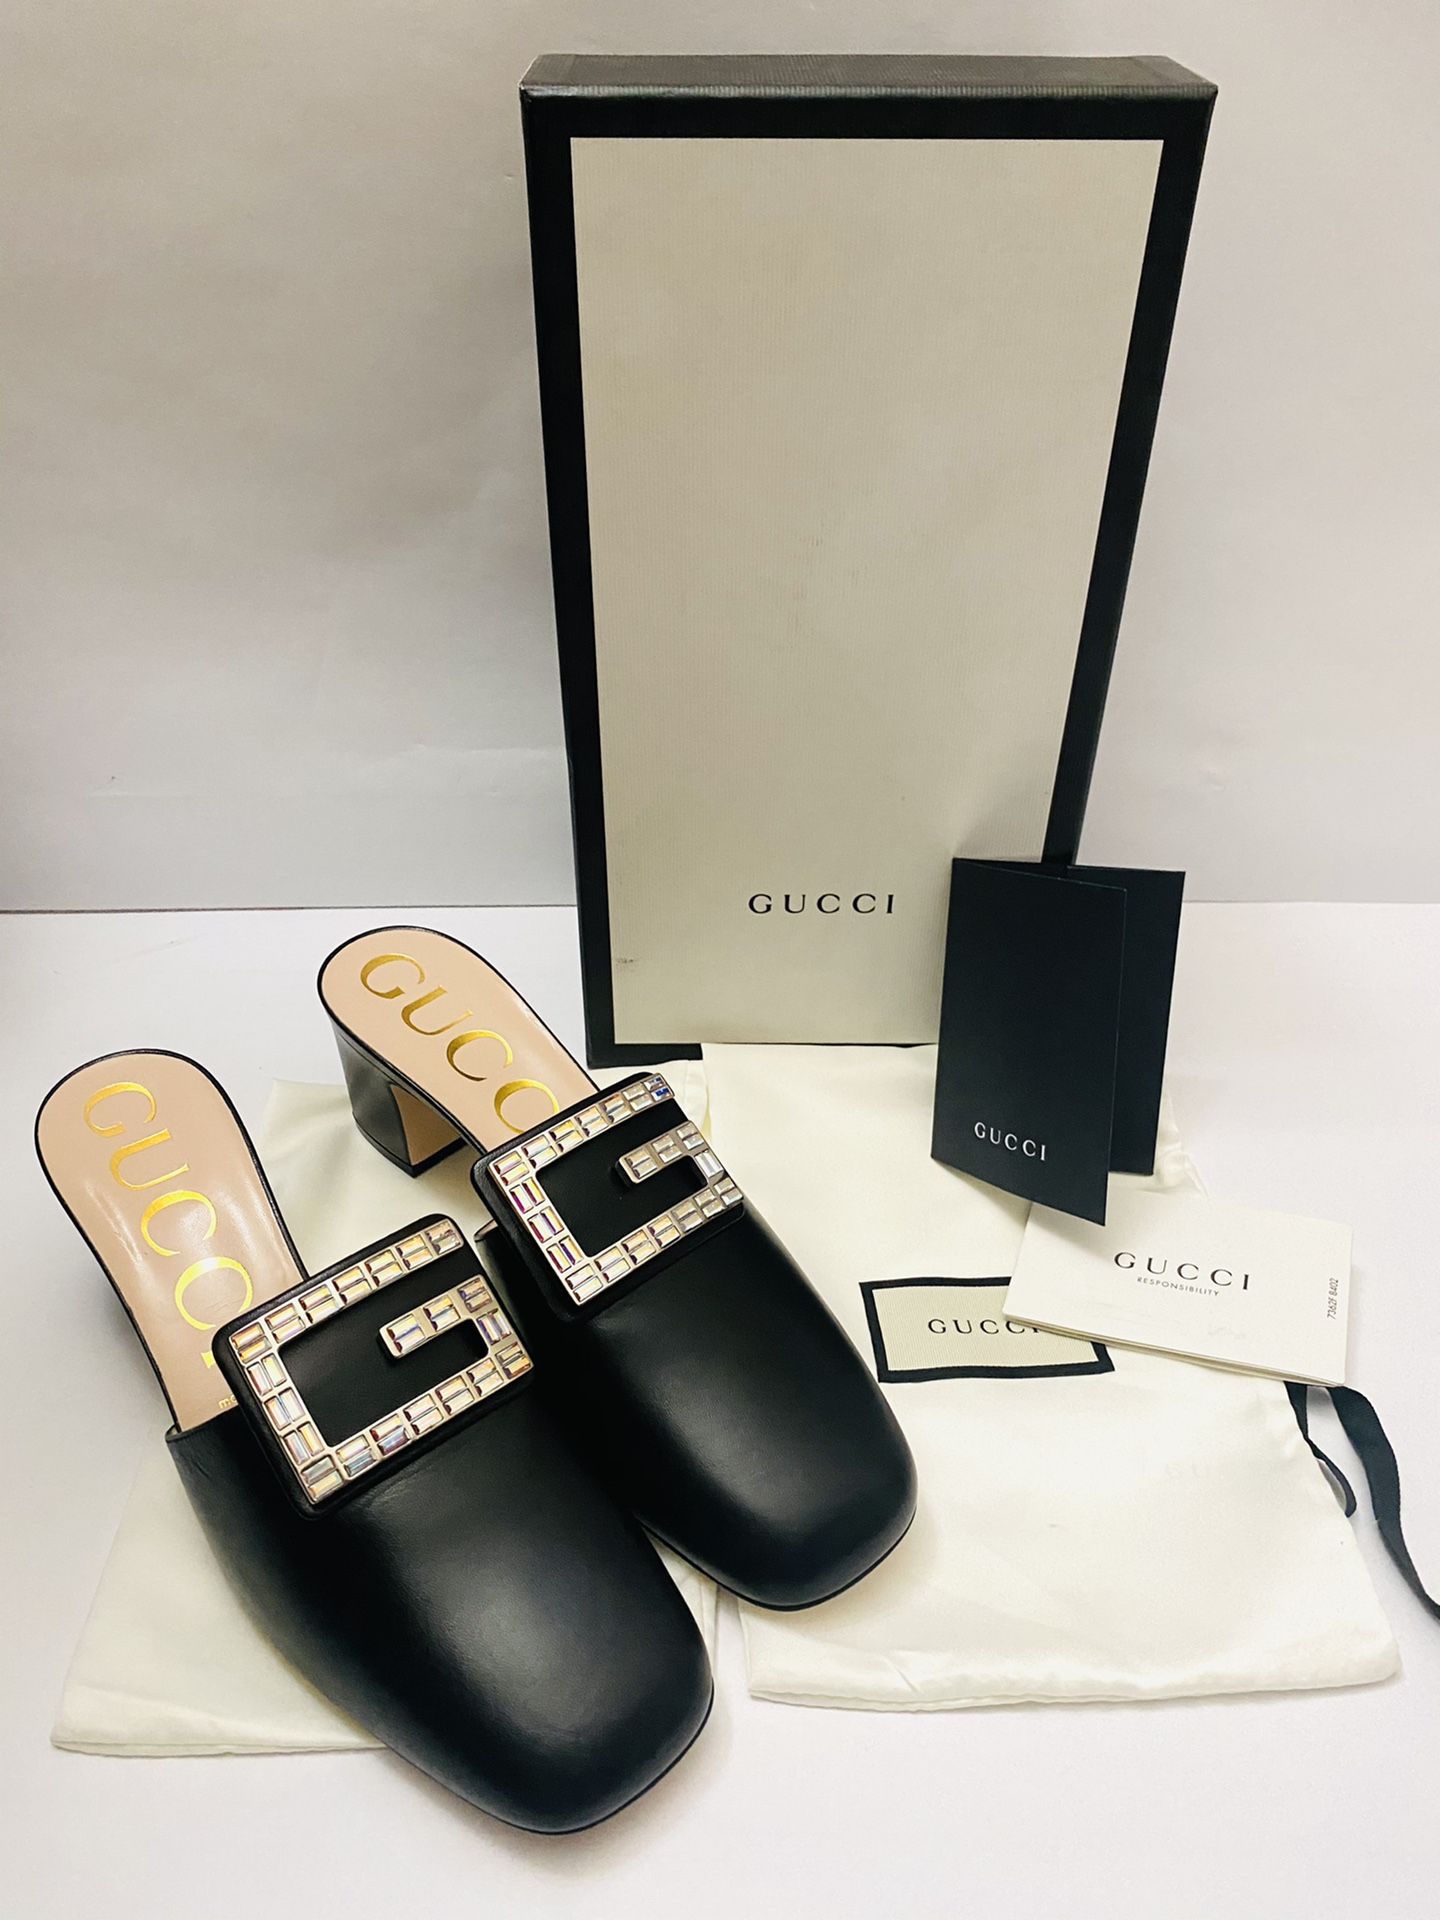 GUCCI Madelyn Crystal Black Leather Mules Slides Shoes 551439 SIZE 40 (Regular Price $890)